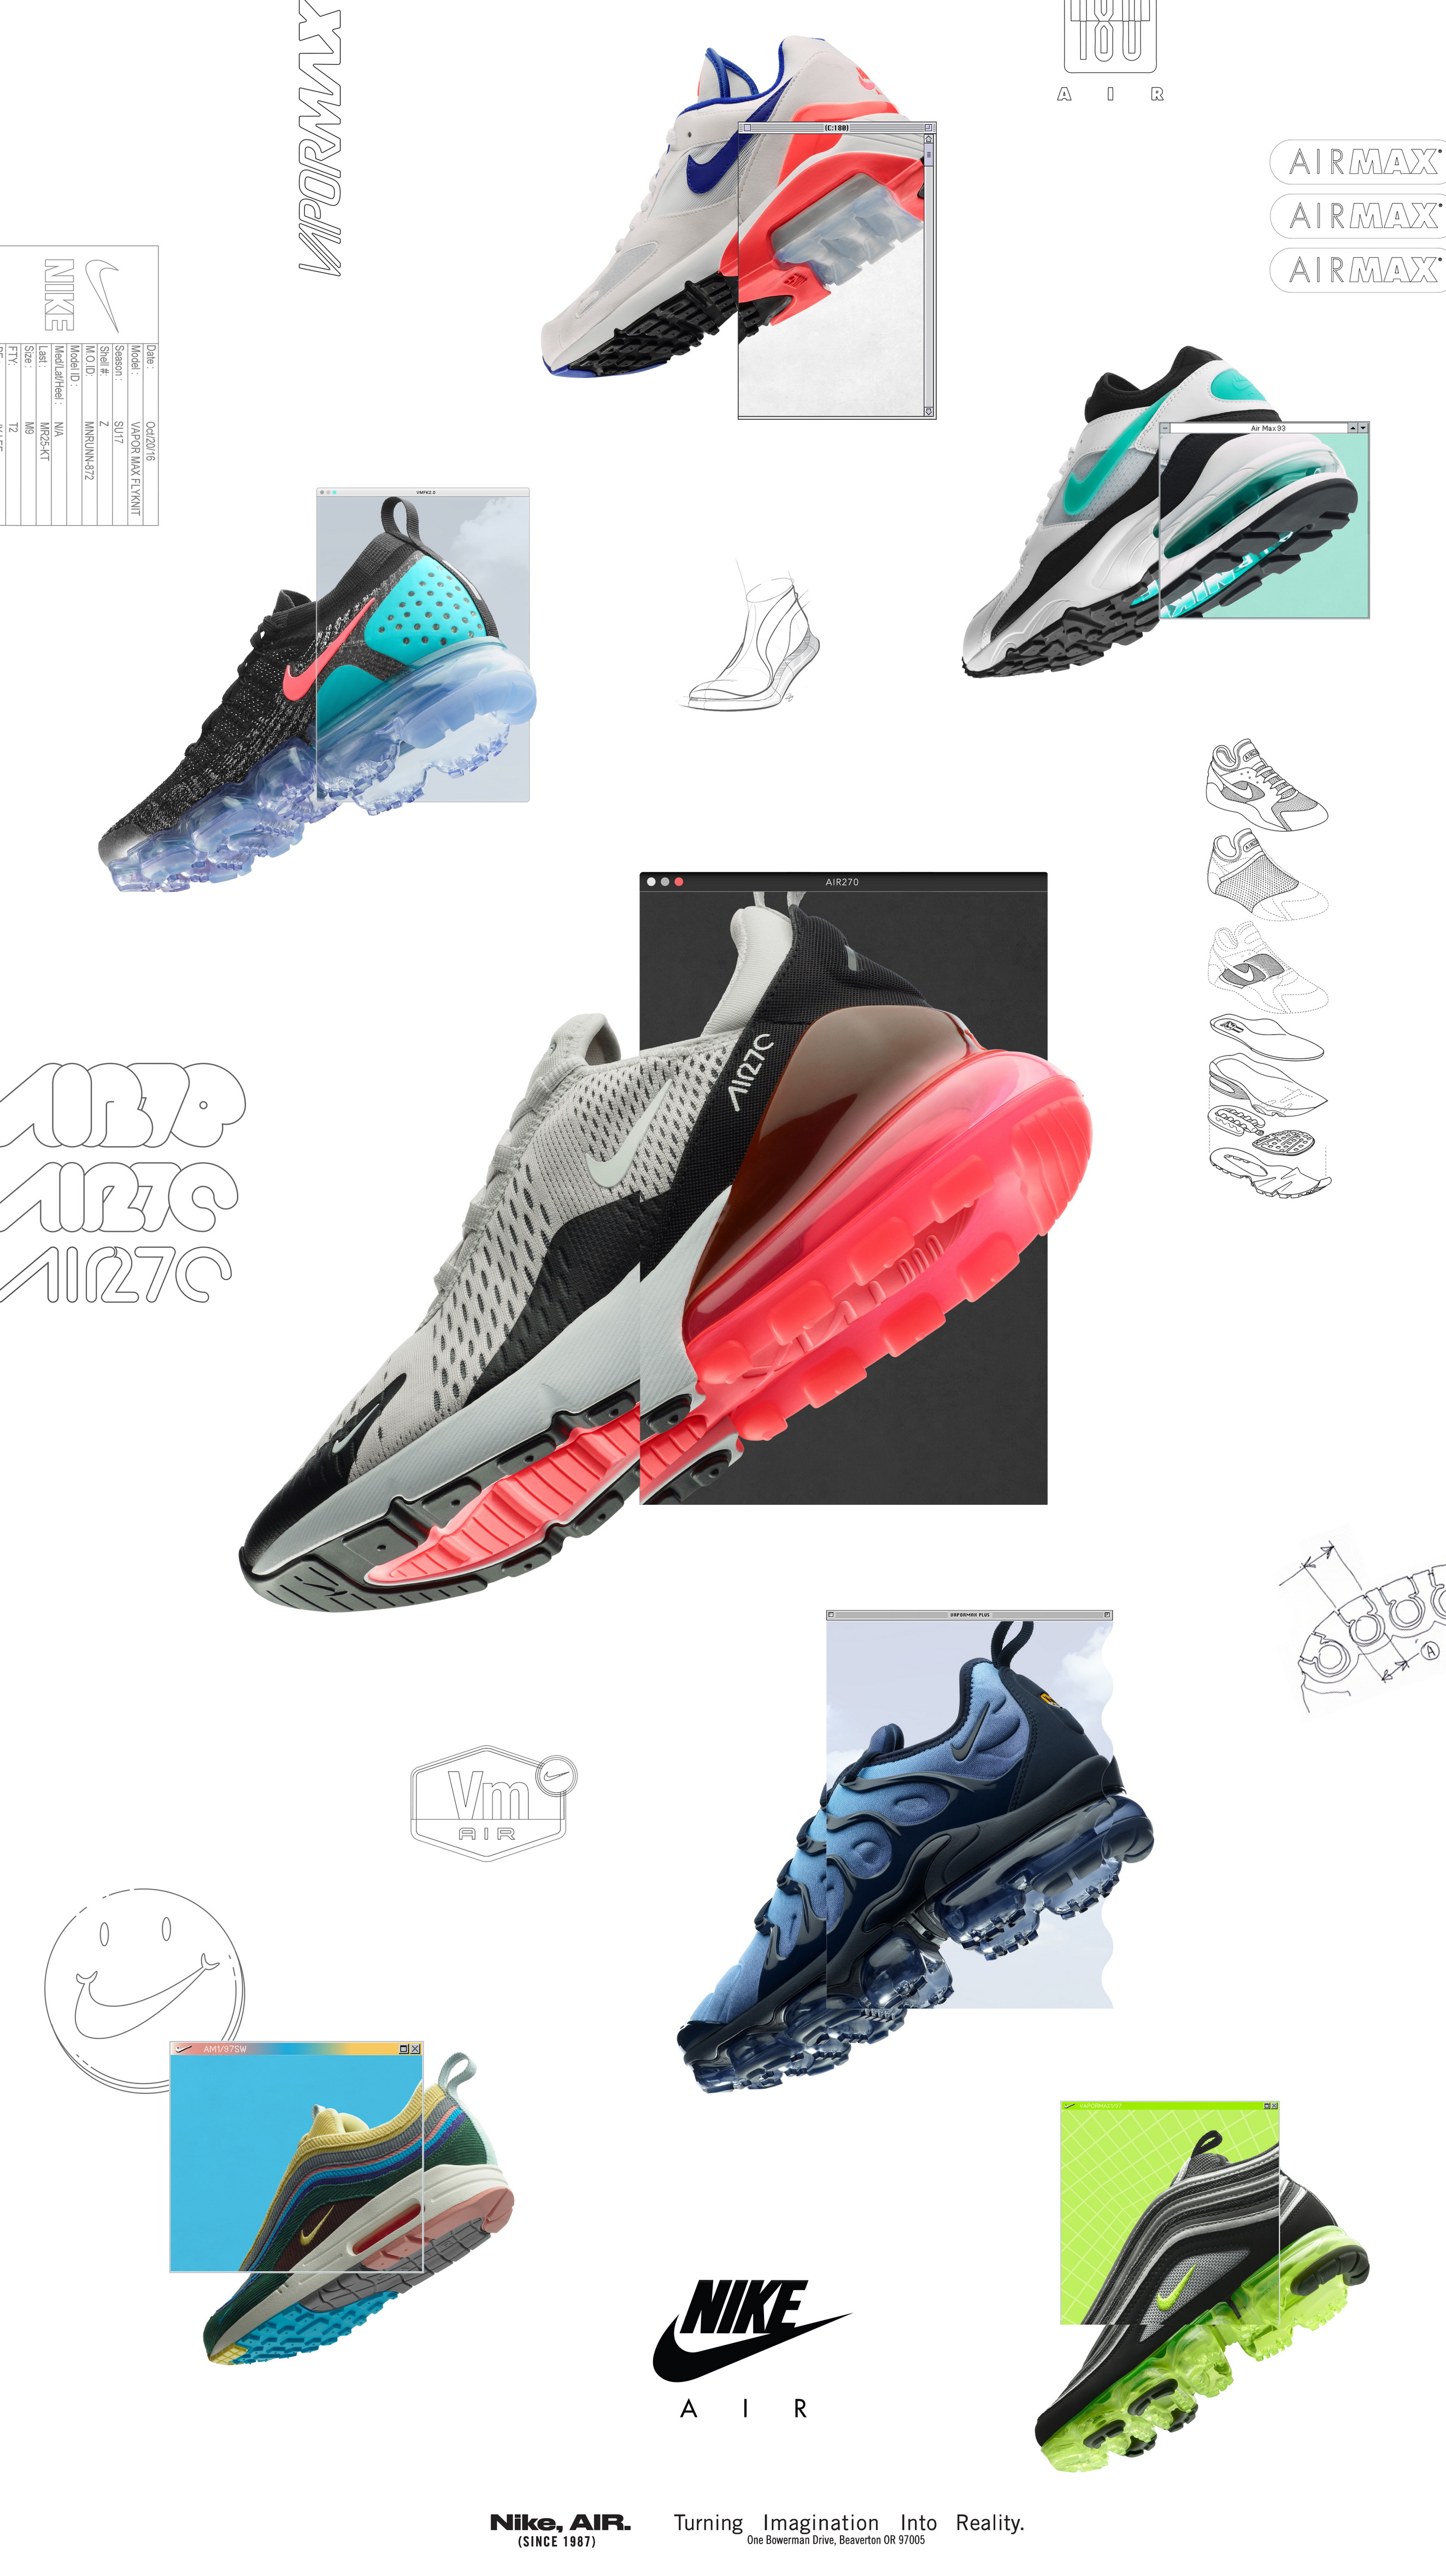 Nike Unveils Air 2018 Releases - WearTesters